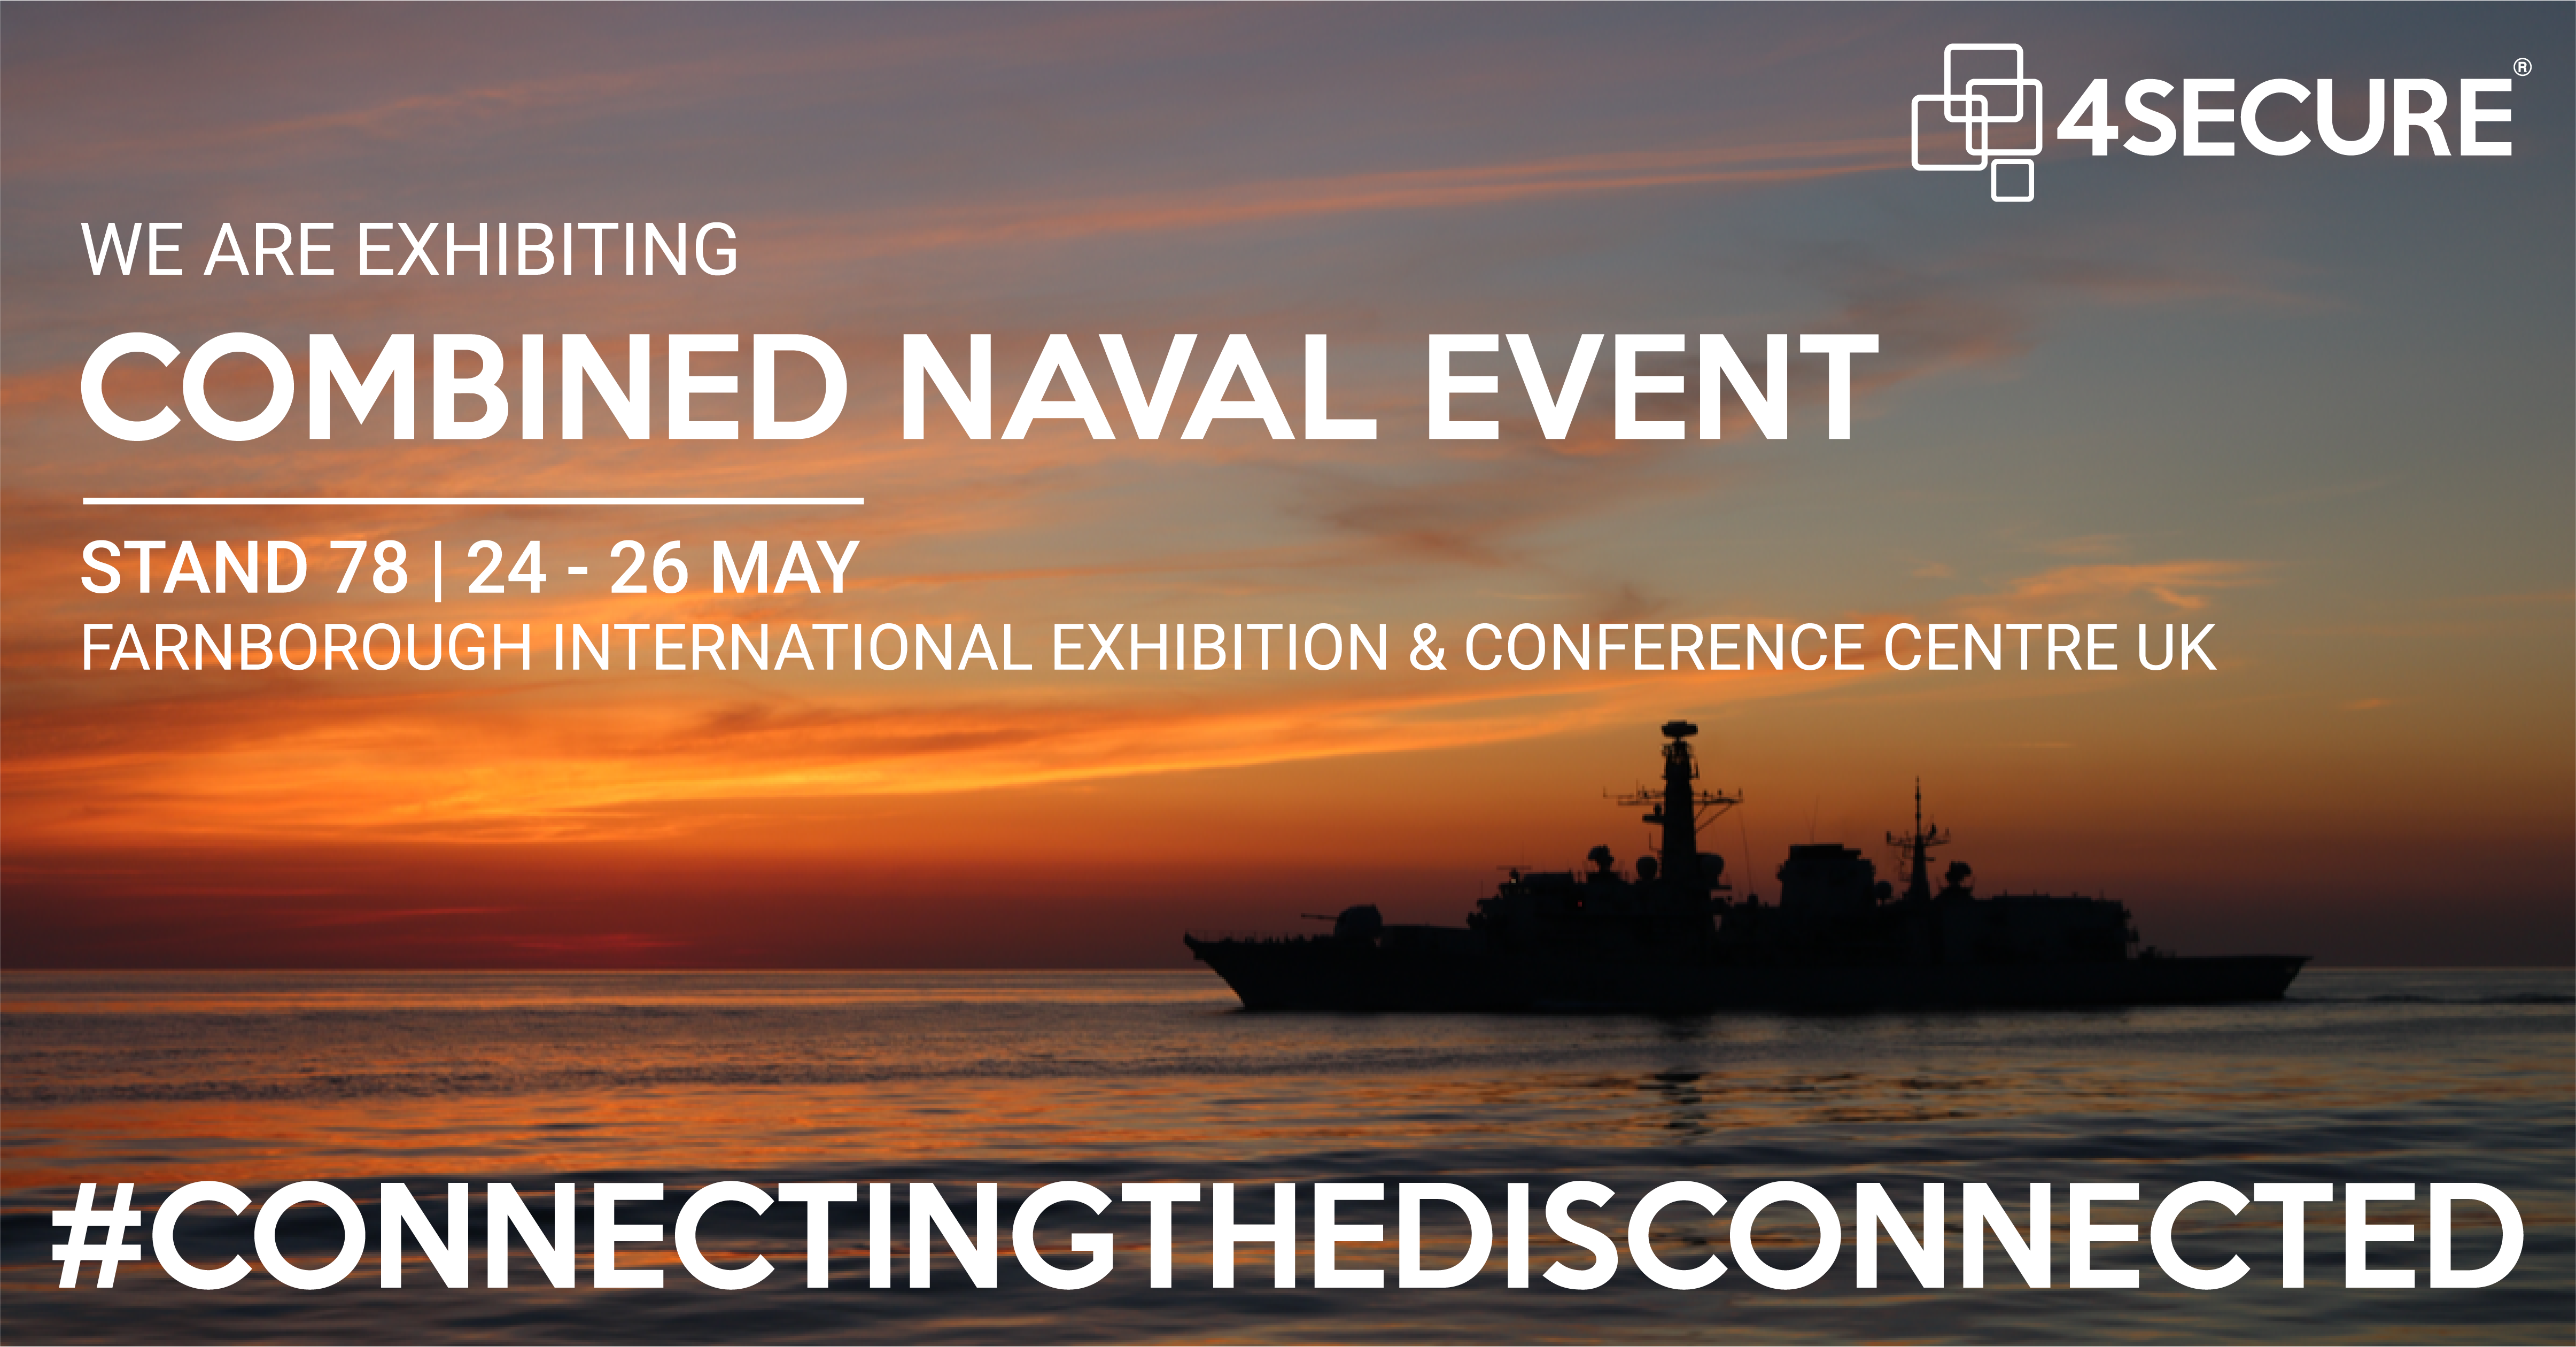 20220324 We are exhibiting - Defence Leaders Event - LinkedIn Post